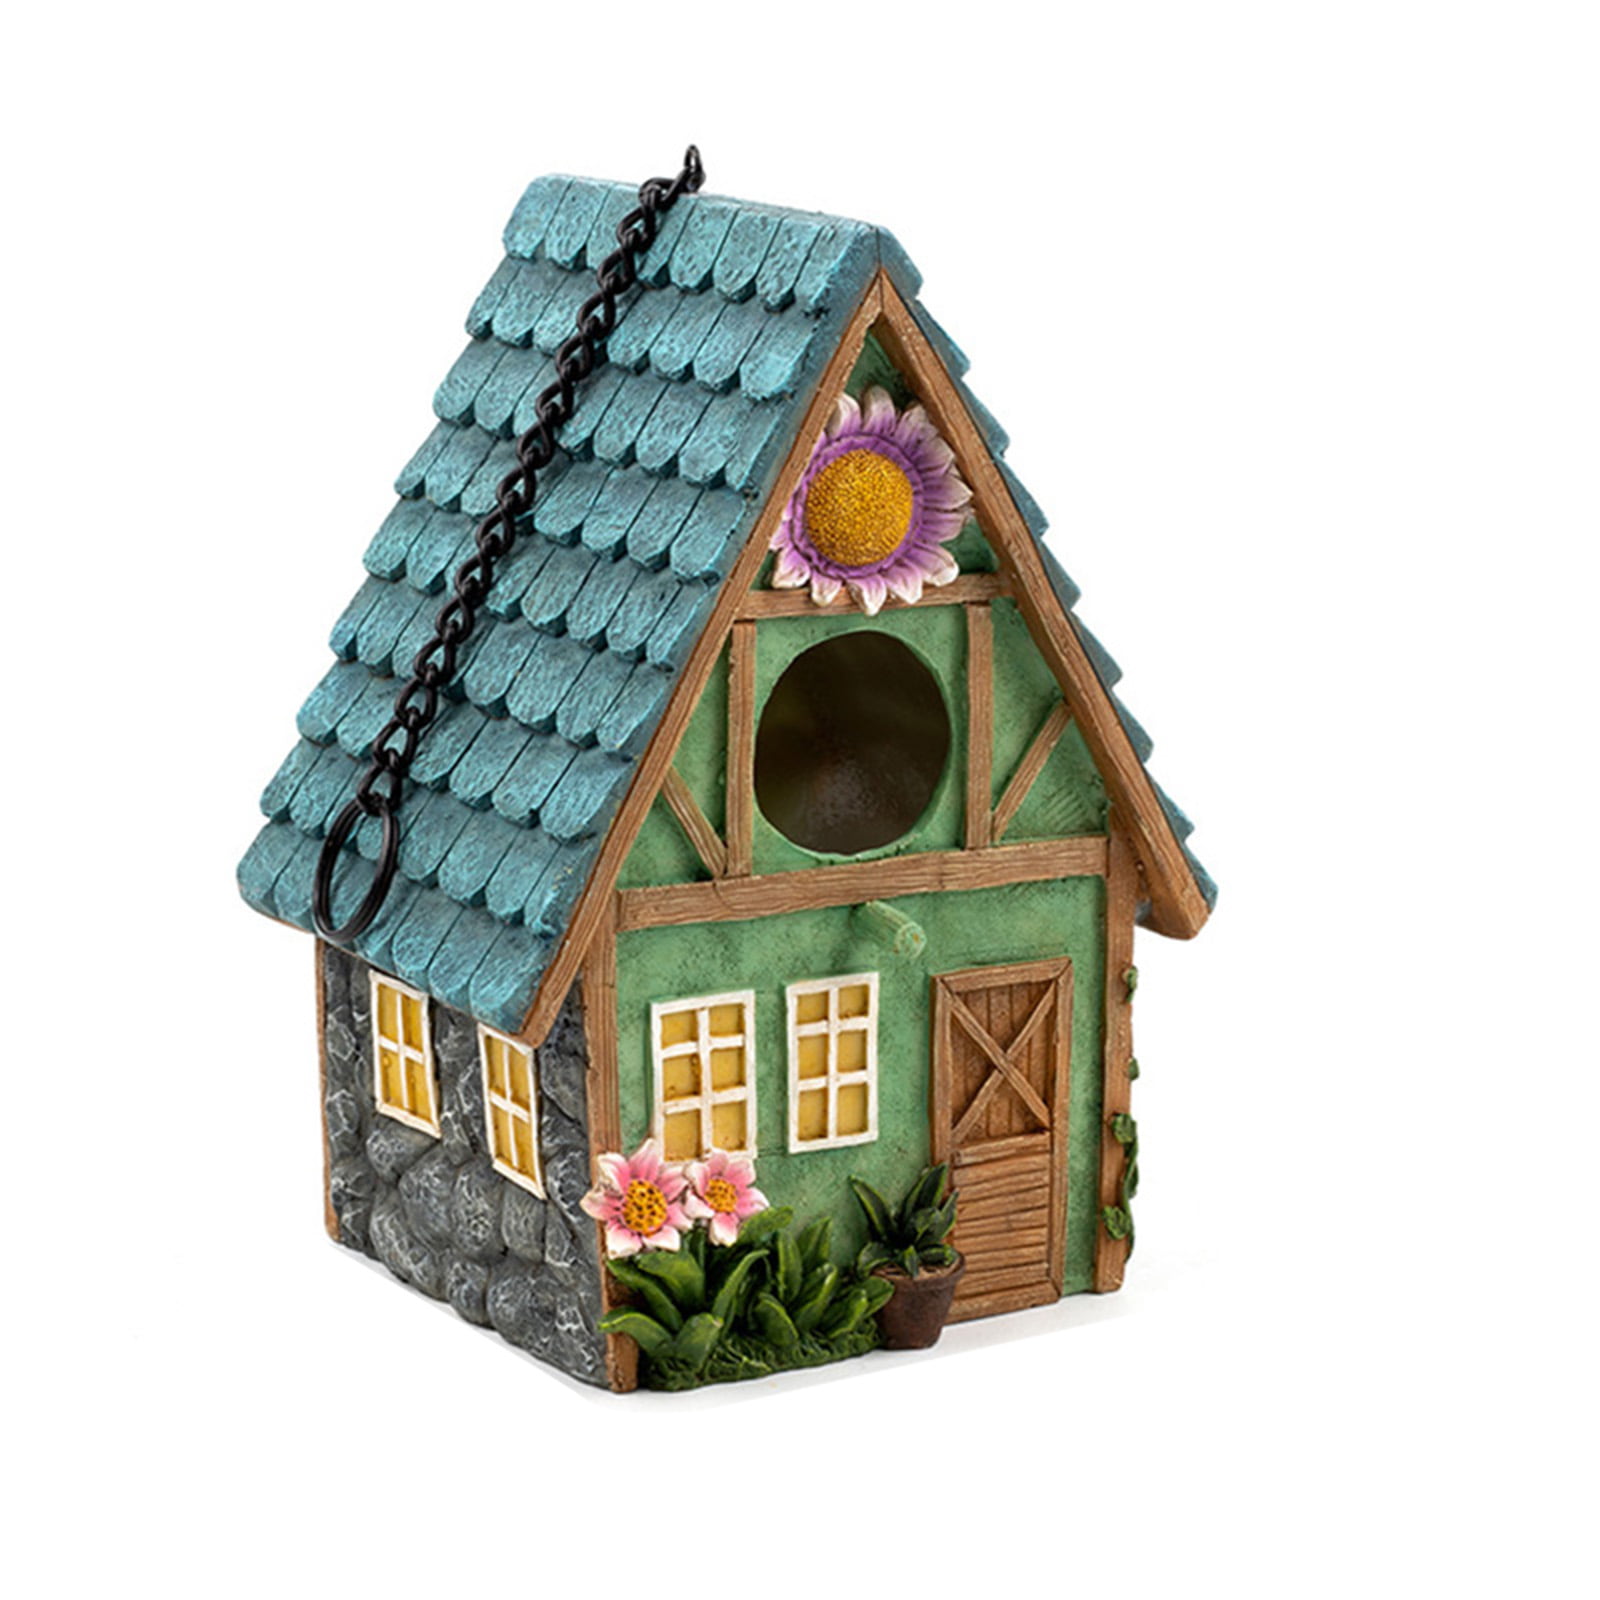 Hand-Painted Hanging Birdhouse Cottages Bird House Outdoor Patio Decorative 